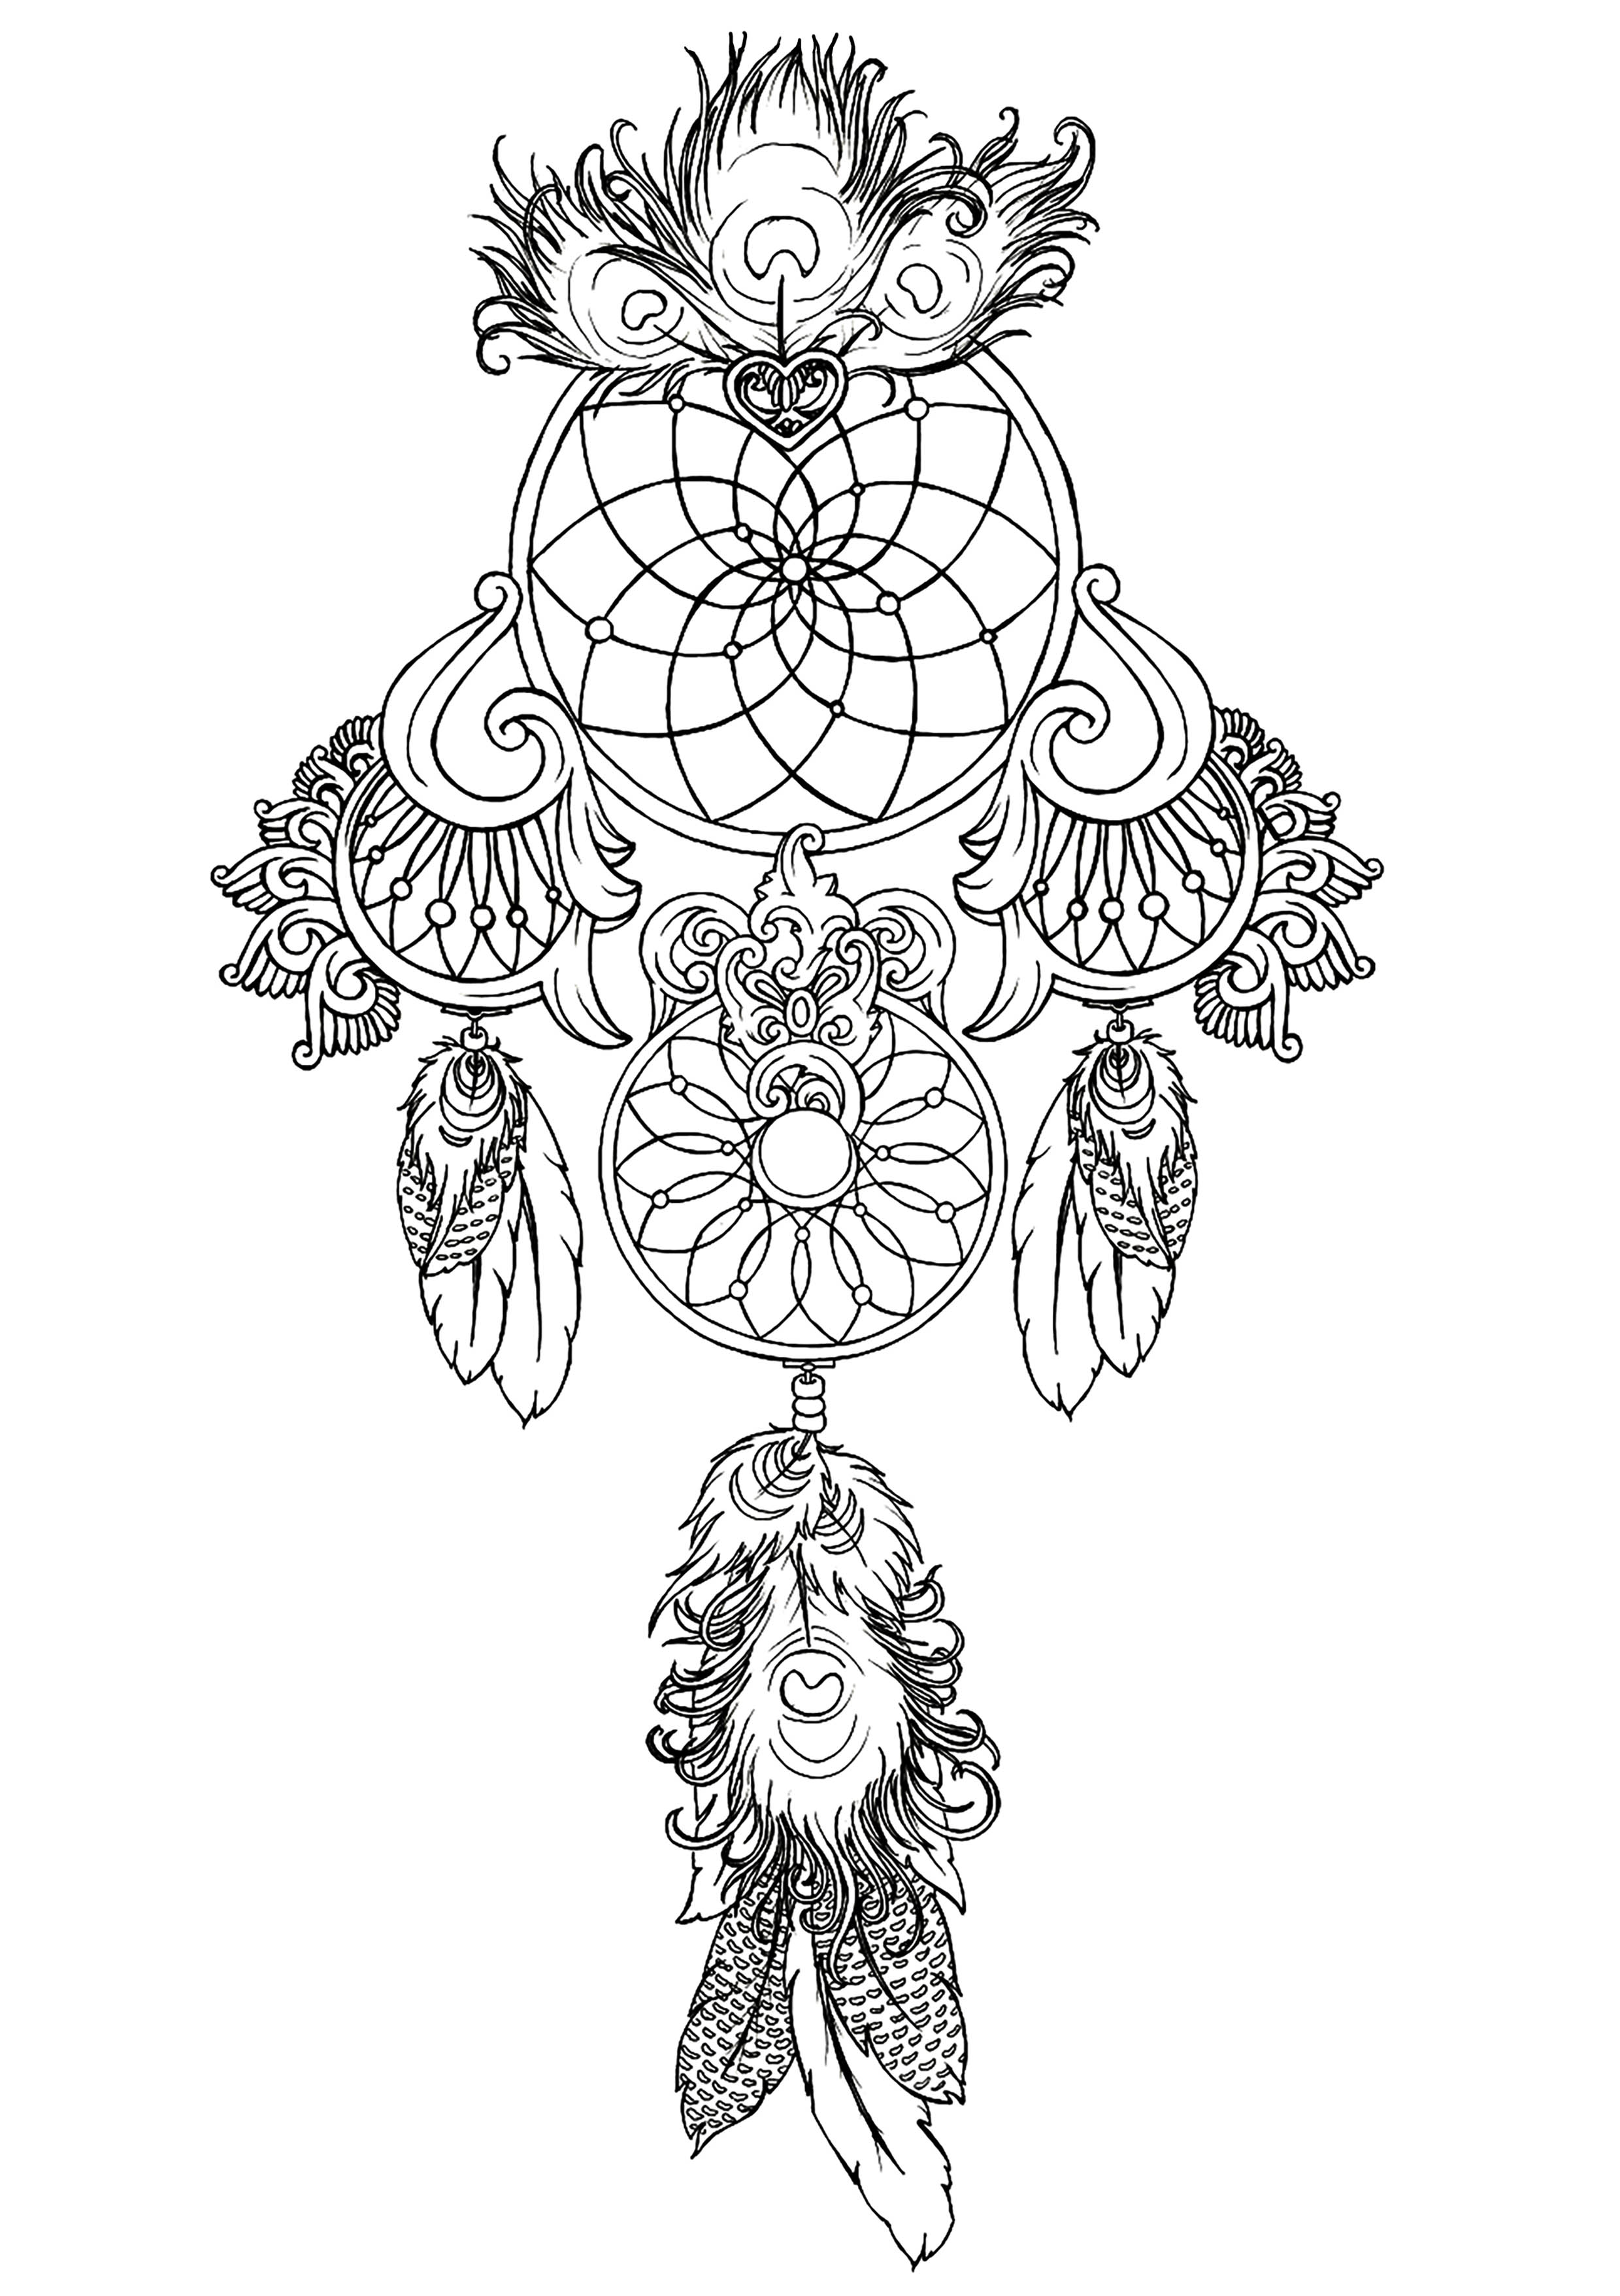 Coloring page of a magnificent dreamcatcher